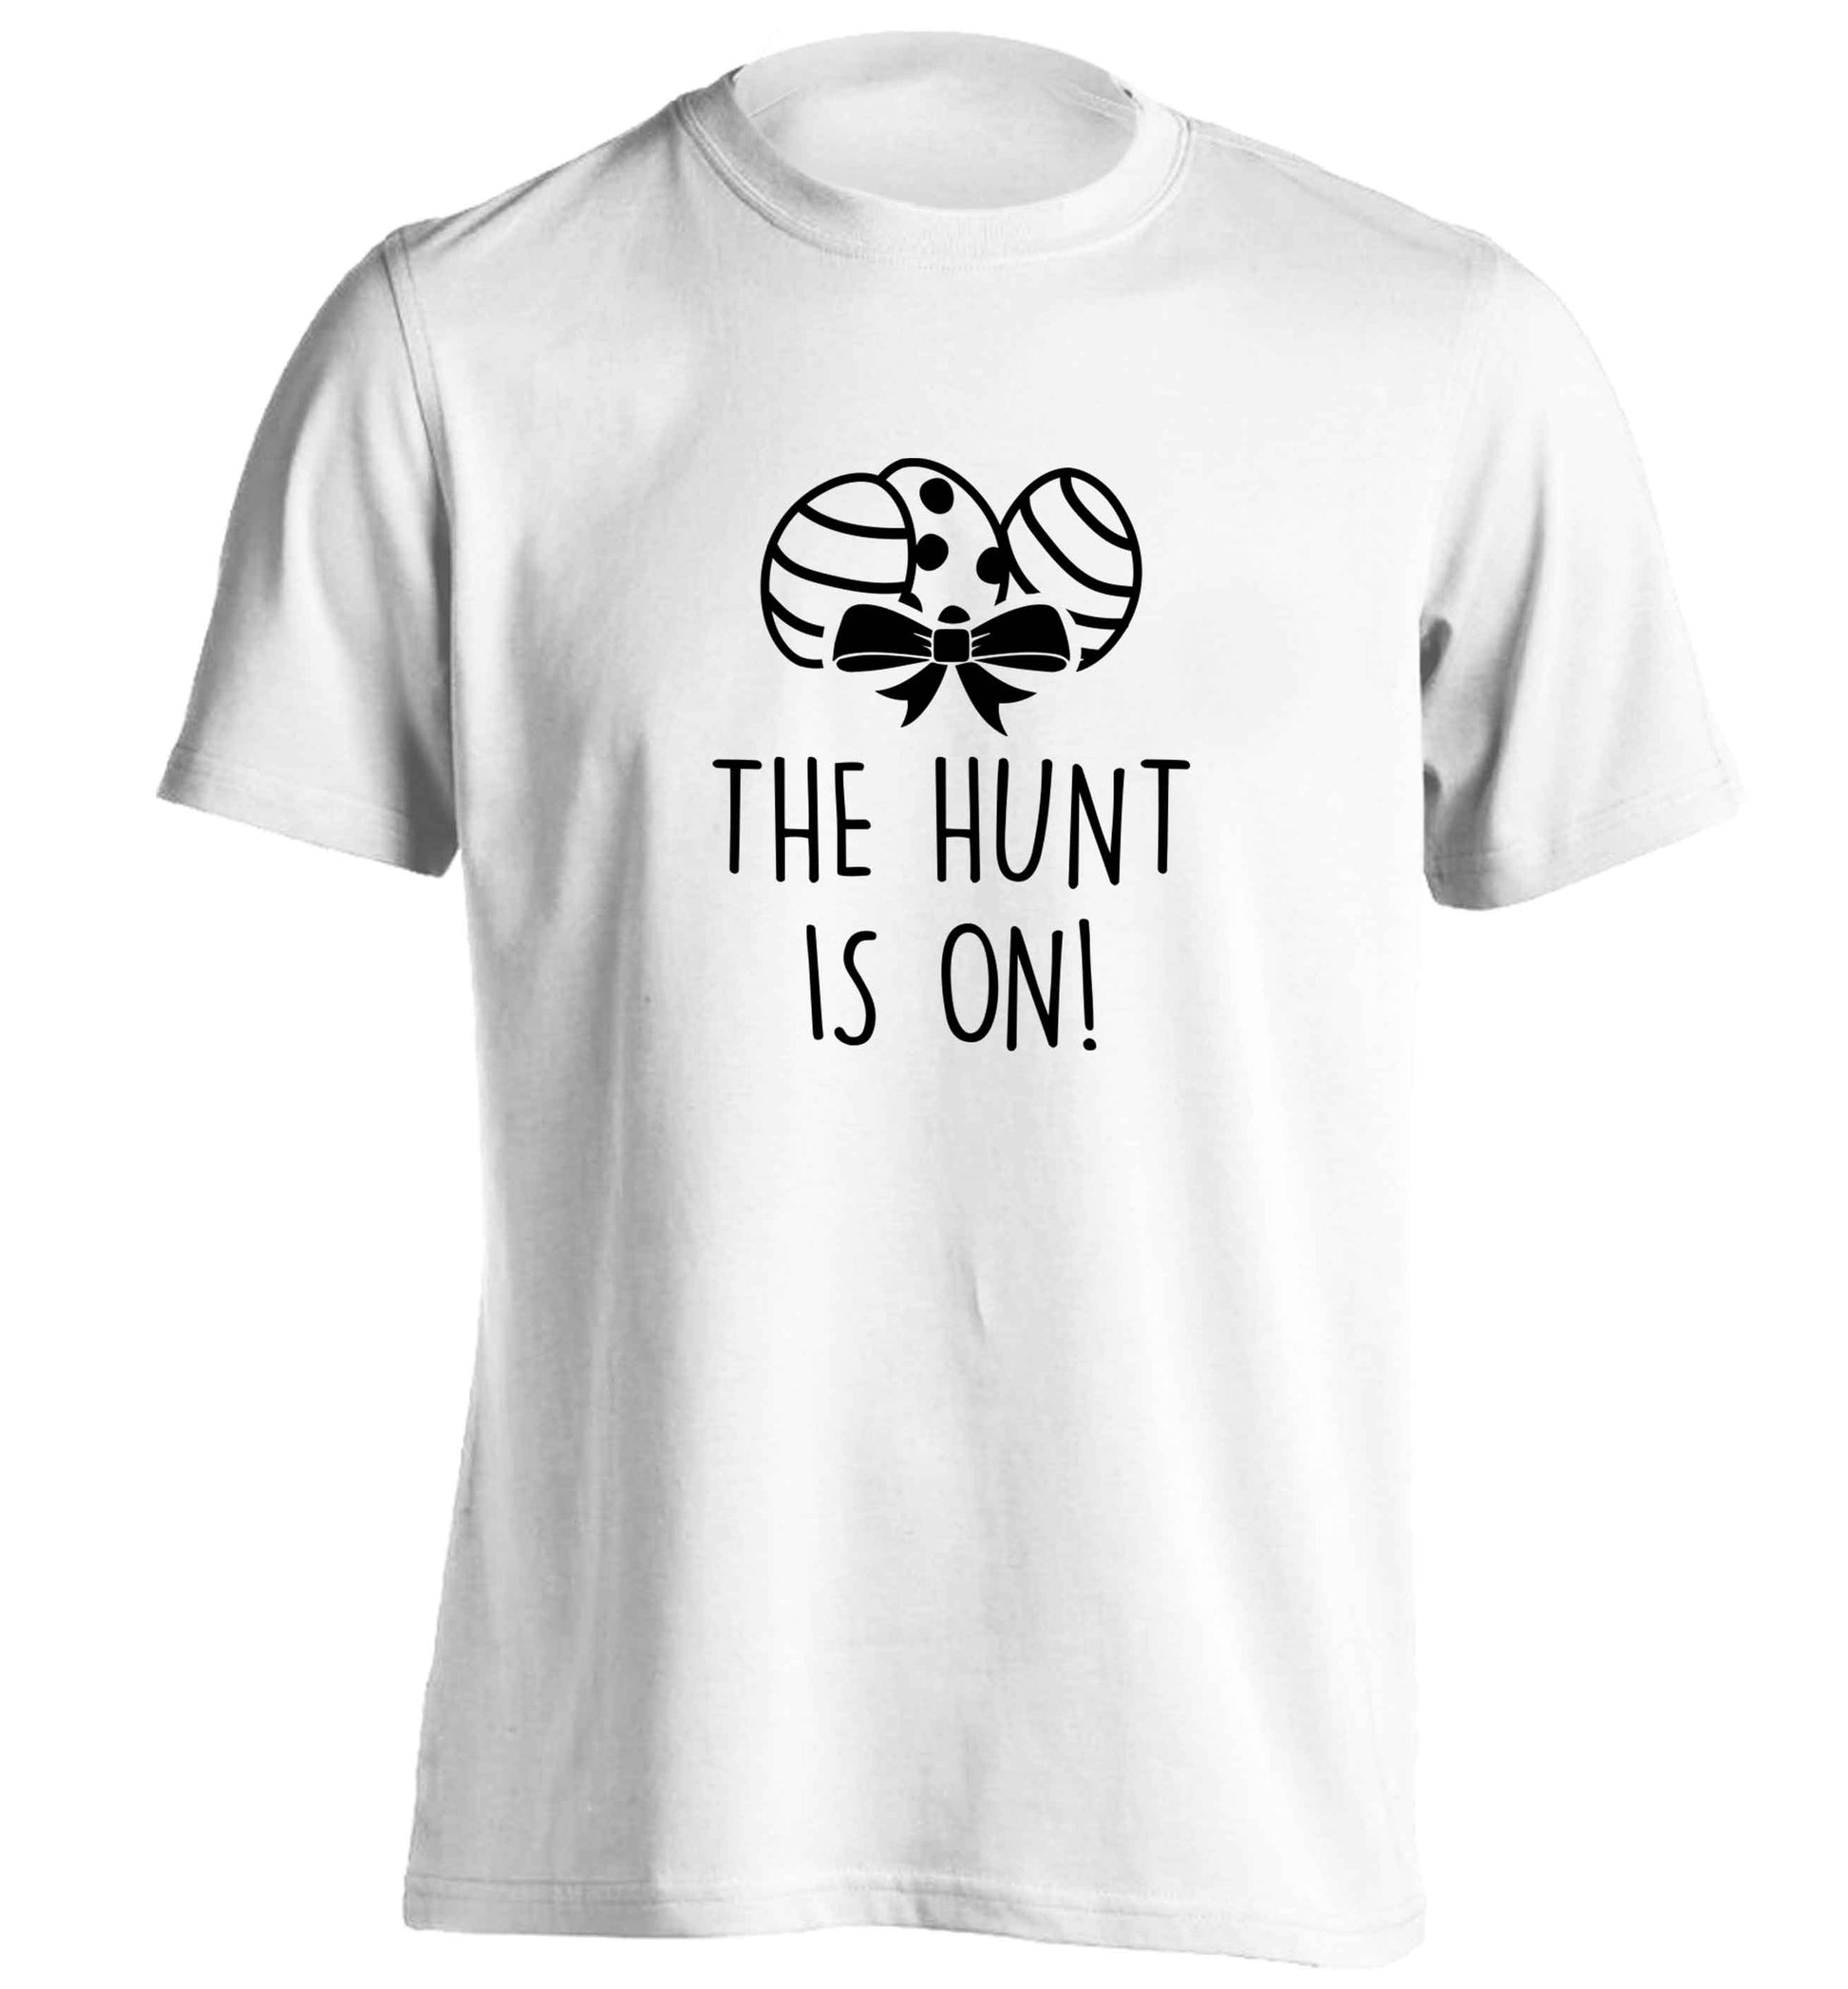 The hunt is on adults unisex white Tshirt 2XL